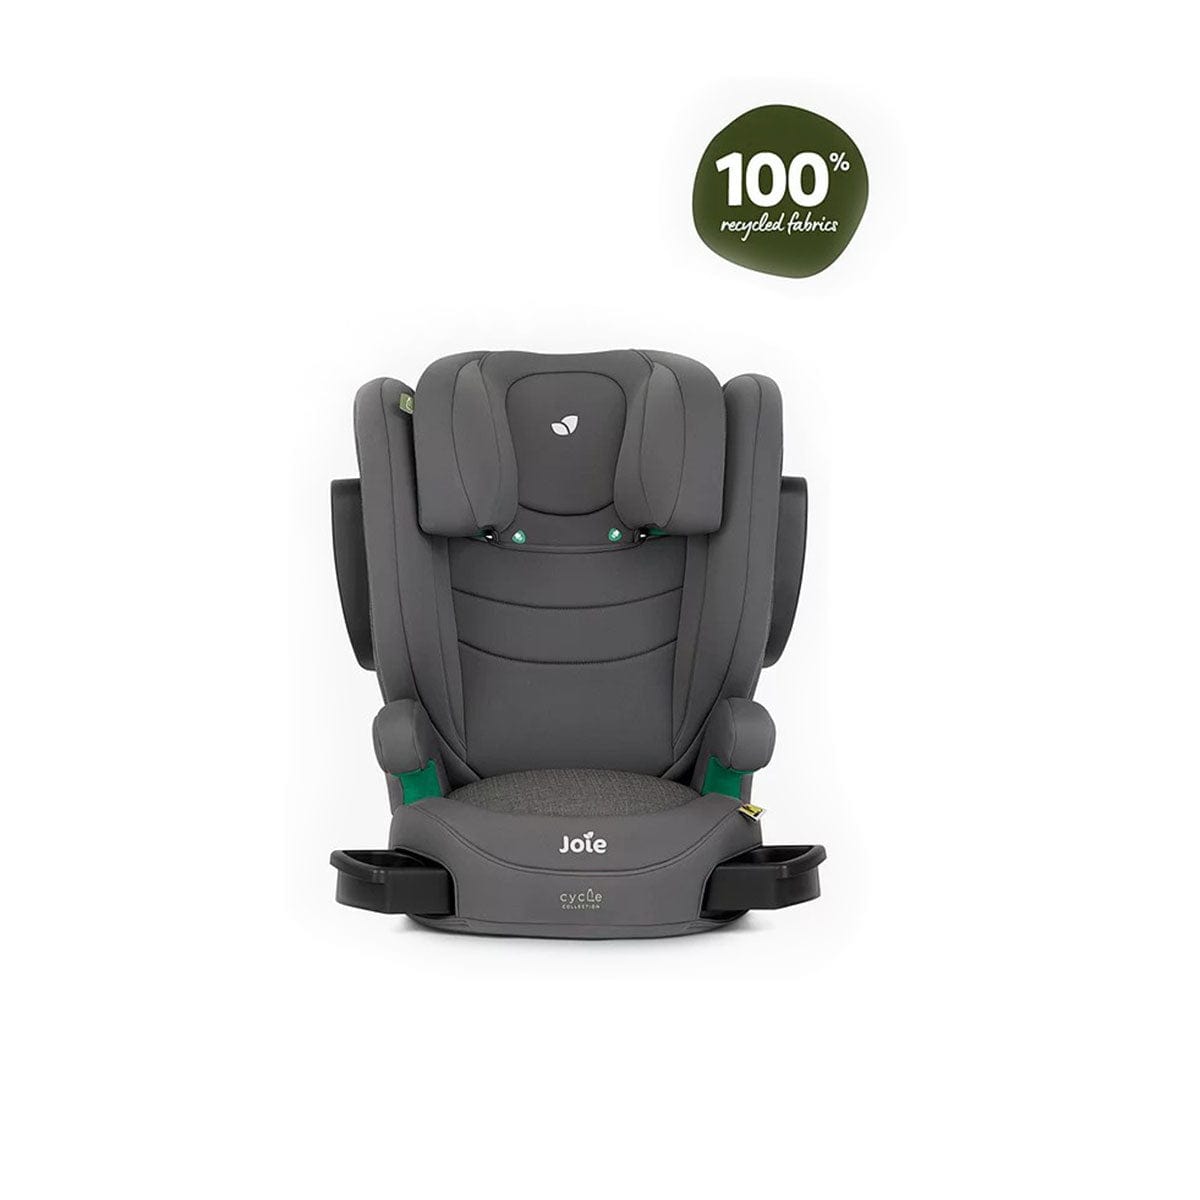 Joie rear facing car seats Joie i-Trillo CYCLE i-Size Car Seat in Shell Grey C2002BACYC000